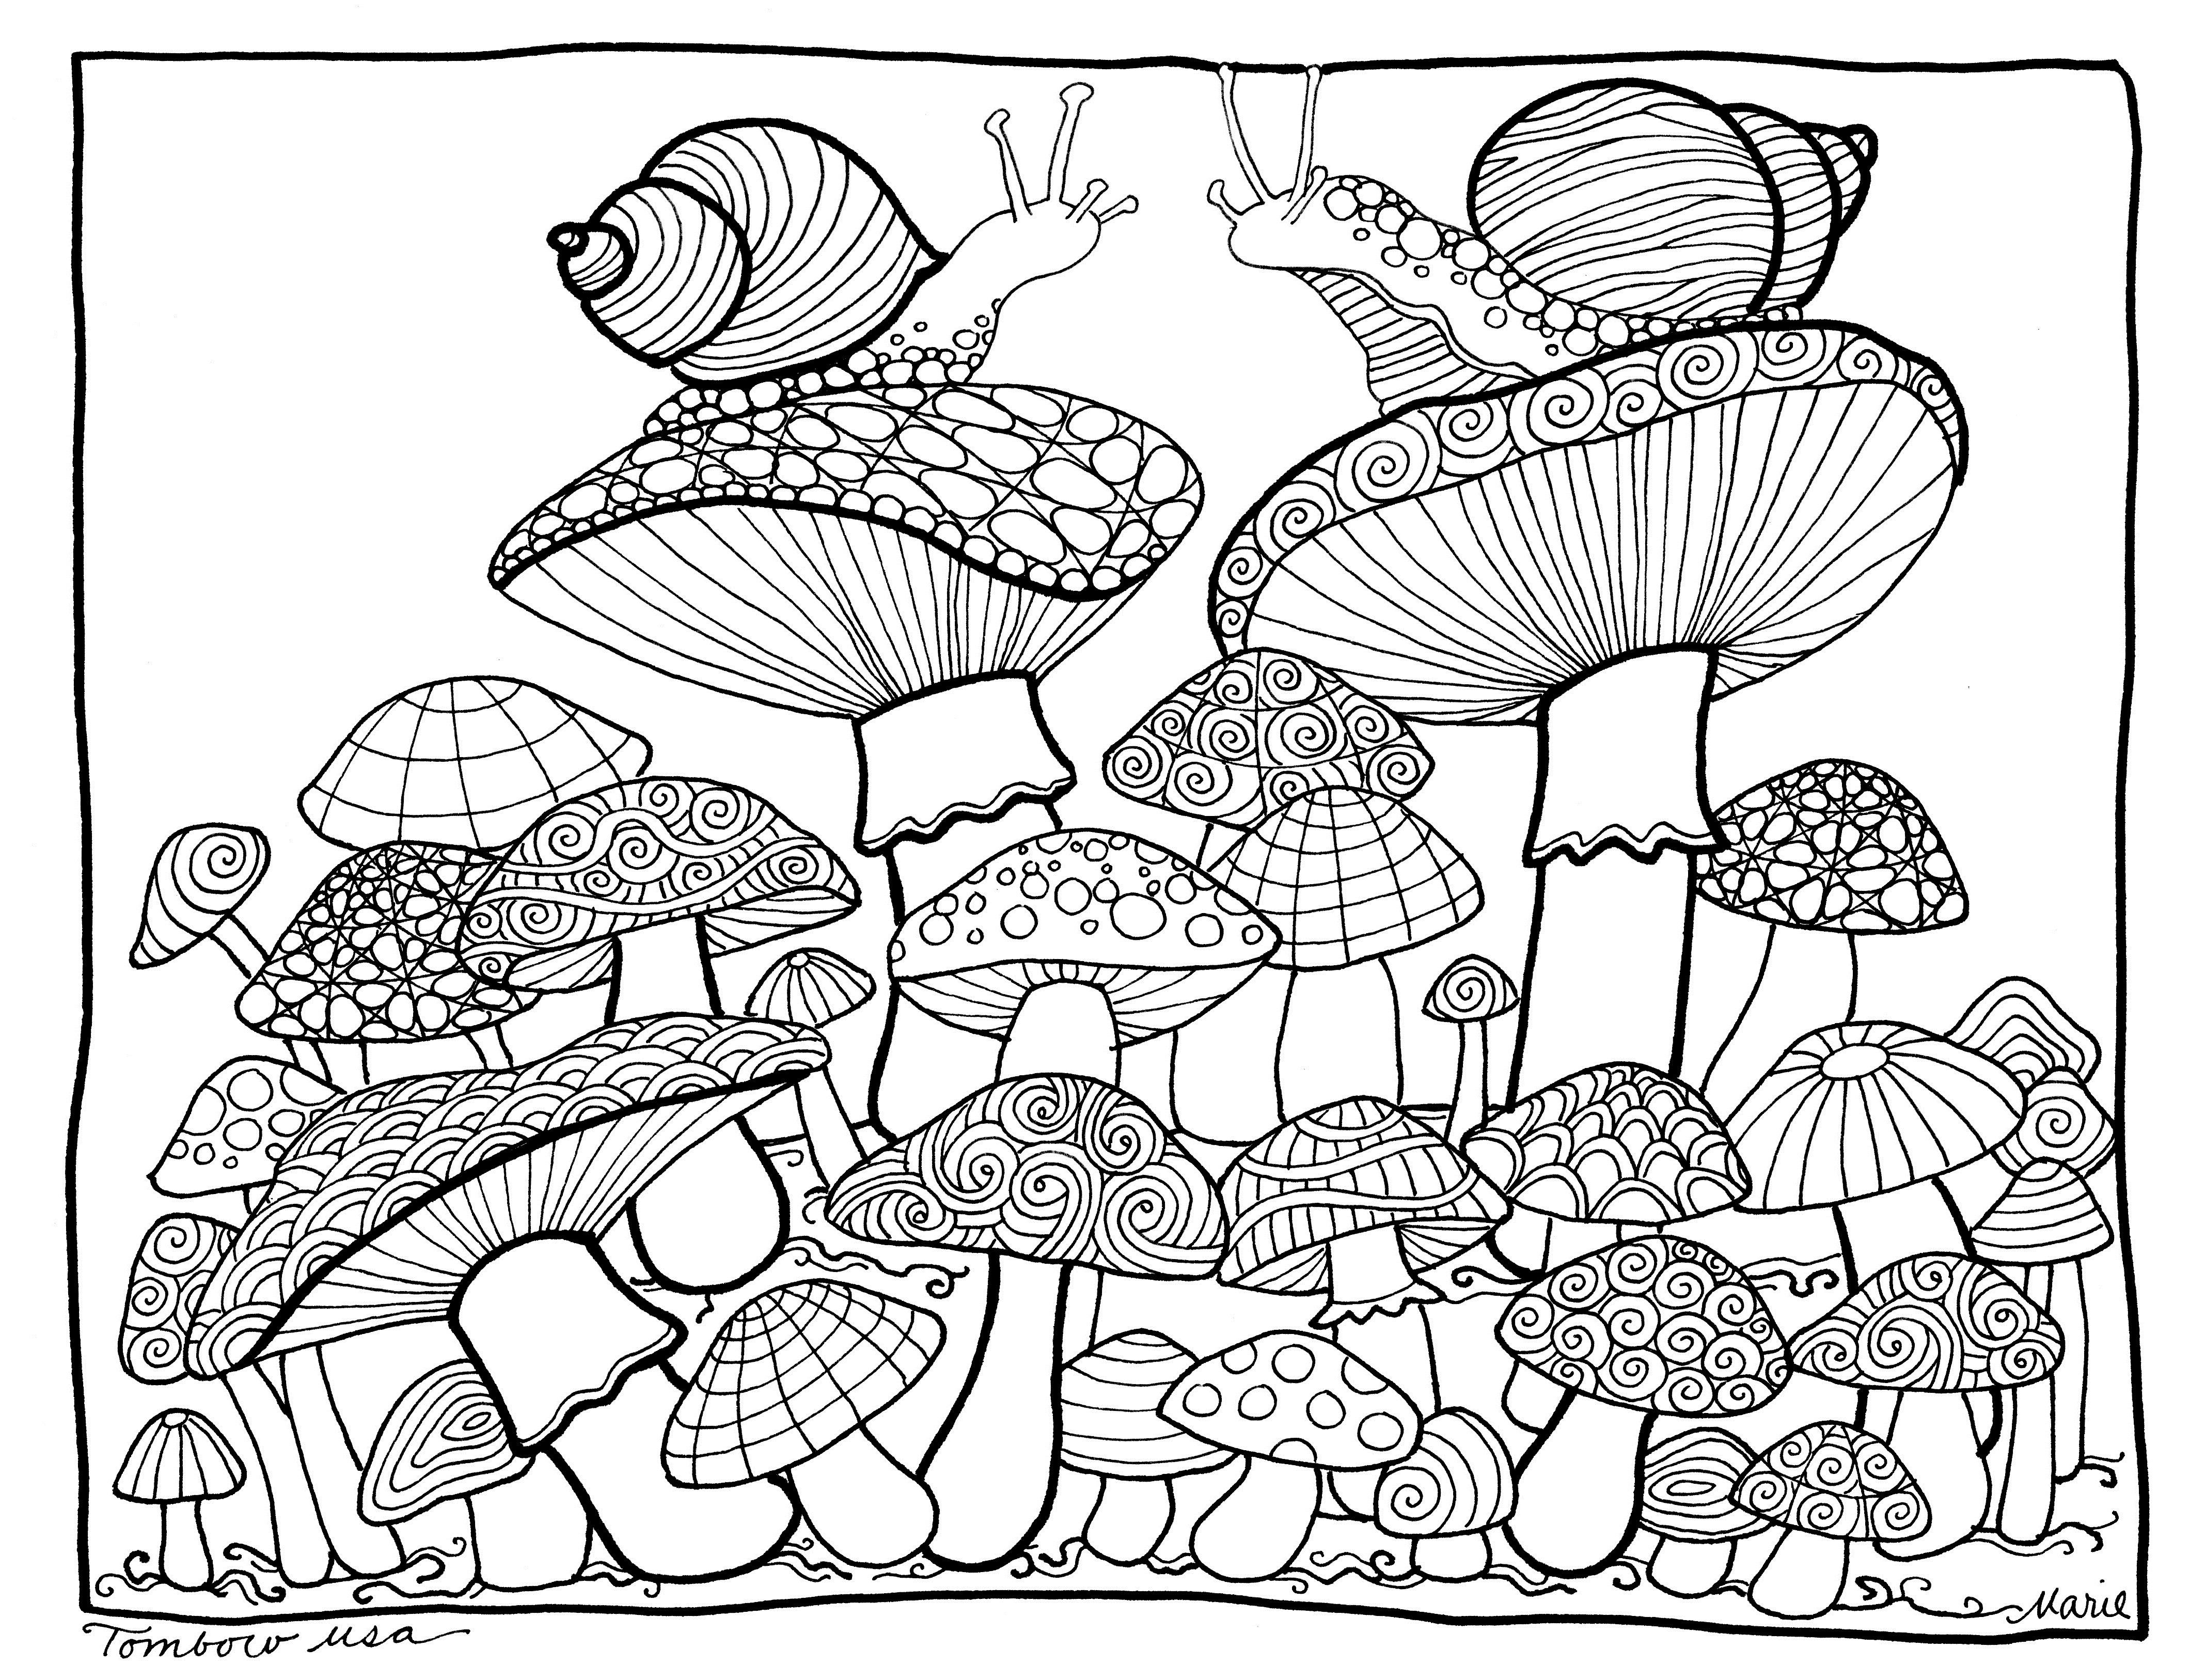 Mushrooms Coloring Pagetombow Usa | Paper | Color, Coloring - Free Printable Mushroom Coloring Pages